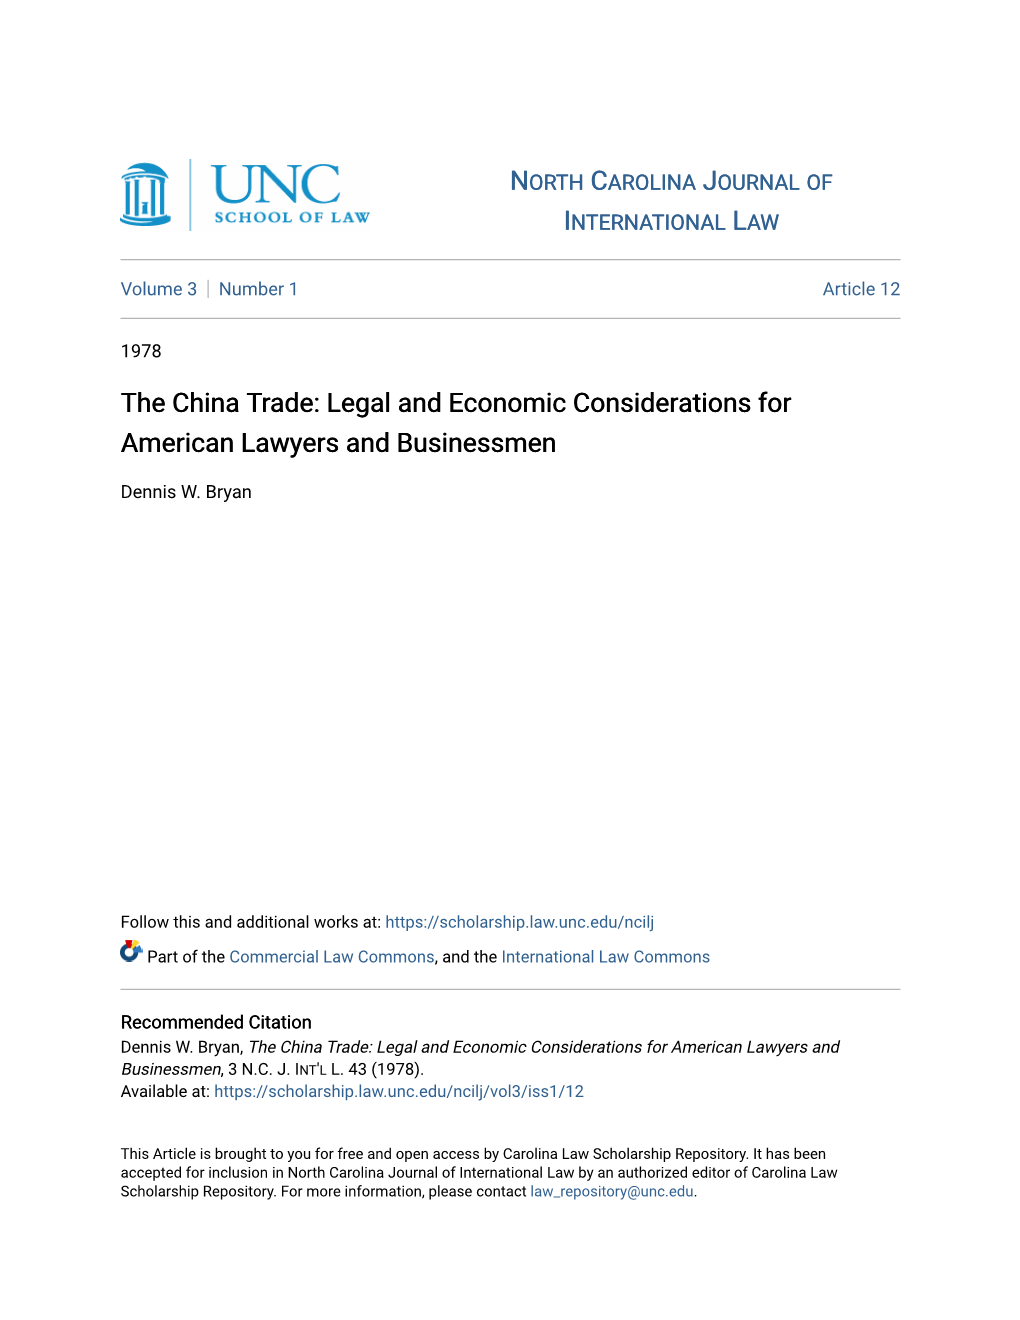 The China Trade: Legal and Economic Considerations for American Lawyers and Businessmen